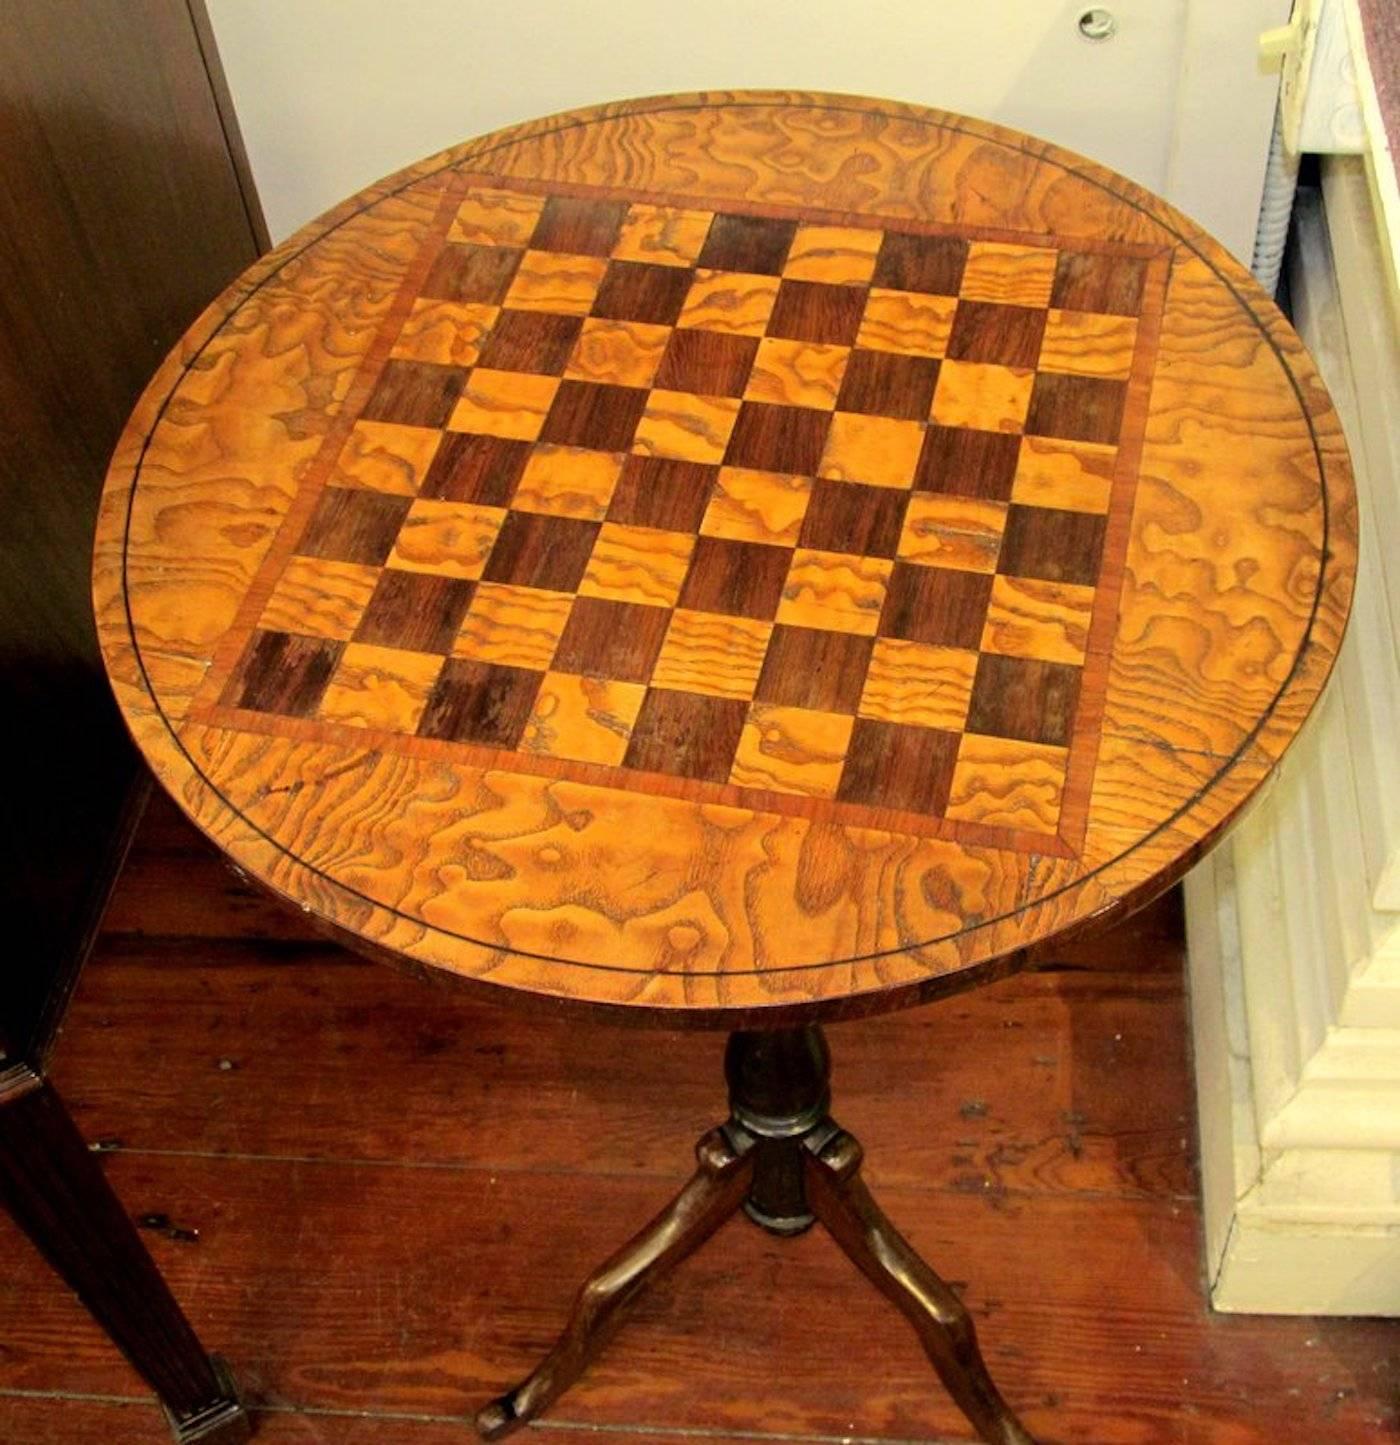 Rare antique English rosewood and elm round games table, beautifully inlaid with a chess/checkerboard top in alternating rosewood and burr elm squares,
circa 1865-1885.